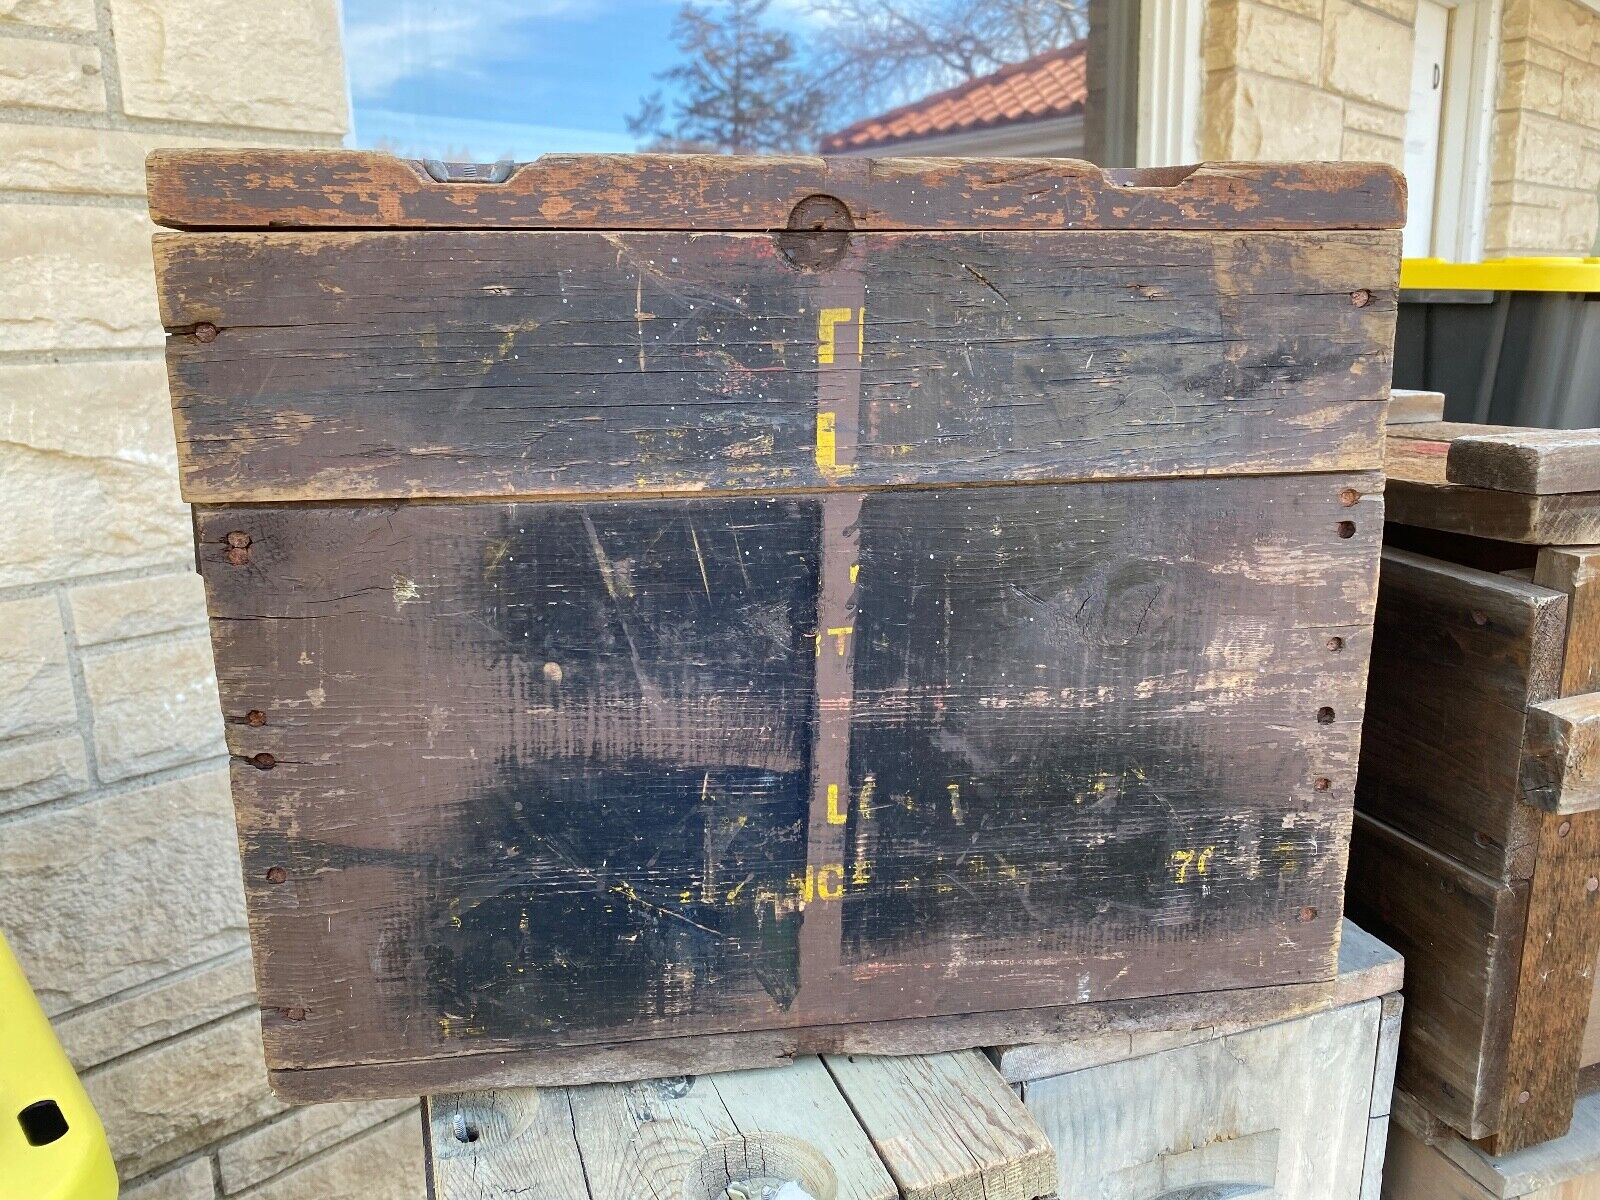 WWII Original US Wooden Ammo Crate .50 cal 350 rounds Box-Original Paint